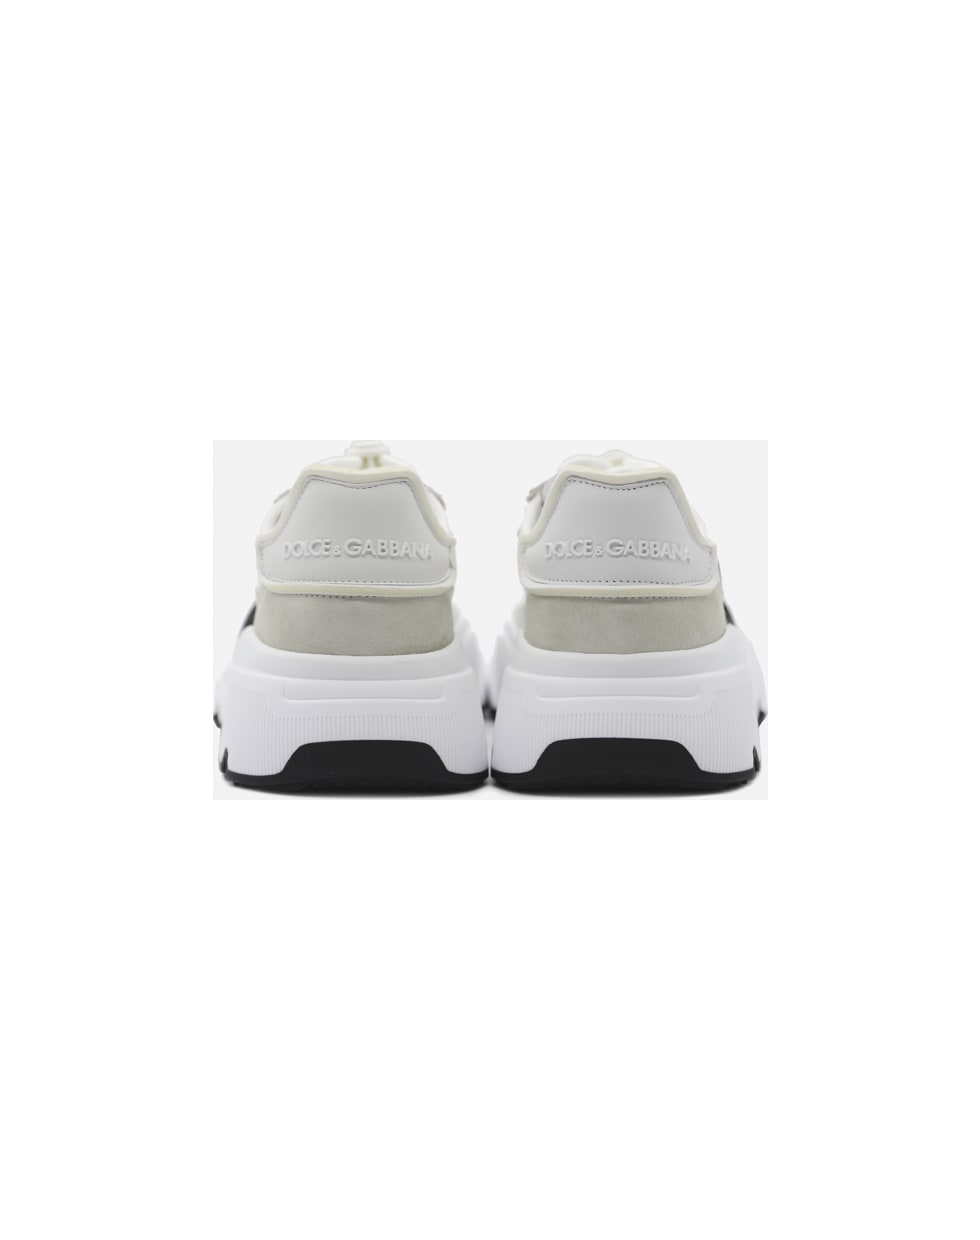 Dolce & Gabbana Daymaster Sneakers In Nylon With Leather Inserts - White, black